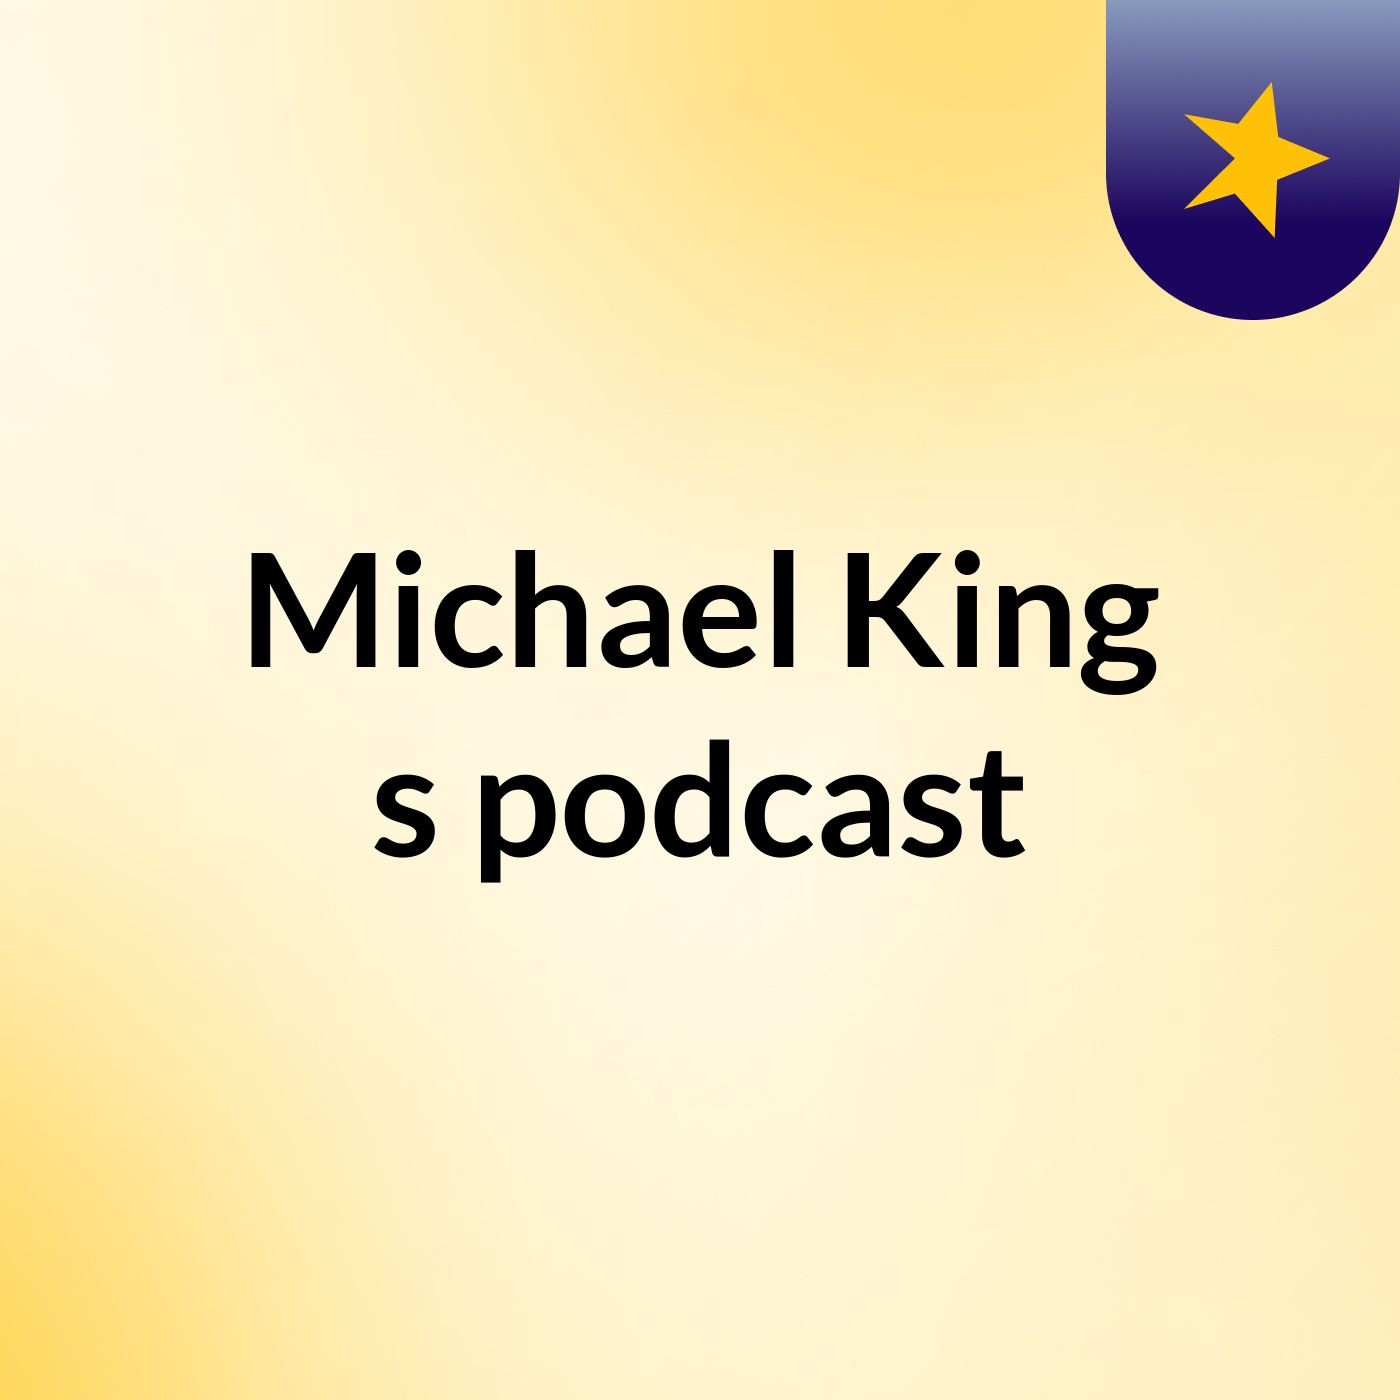 Michael King's podcast